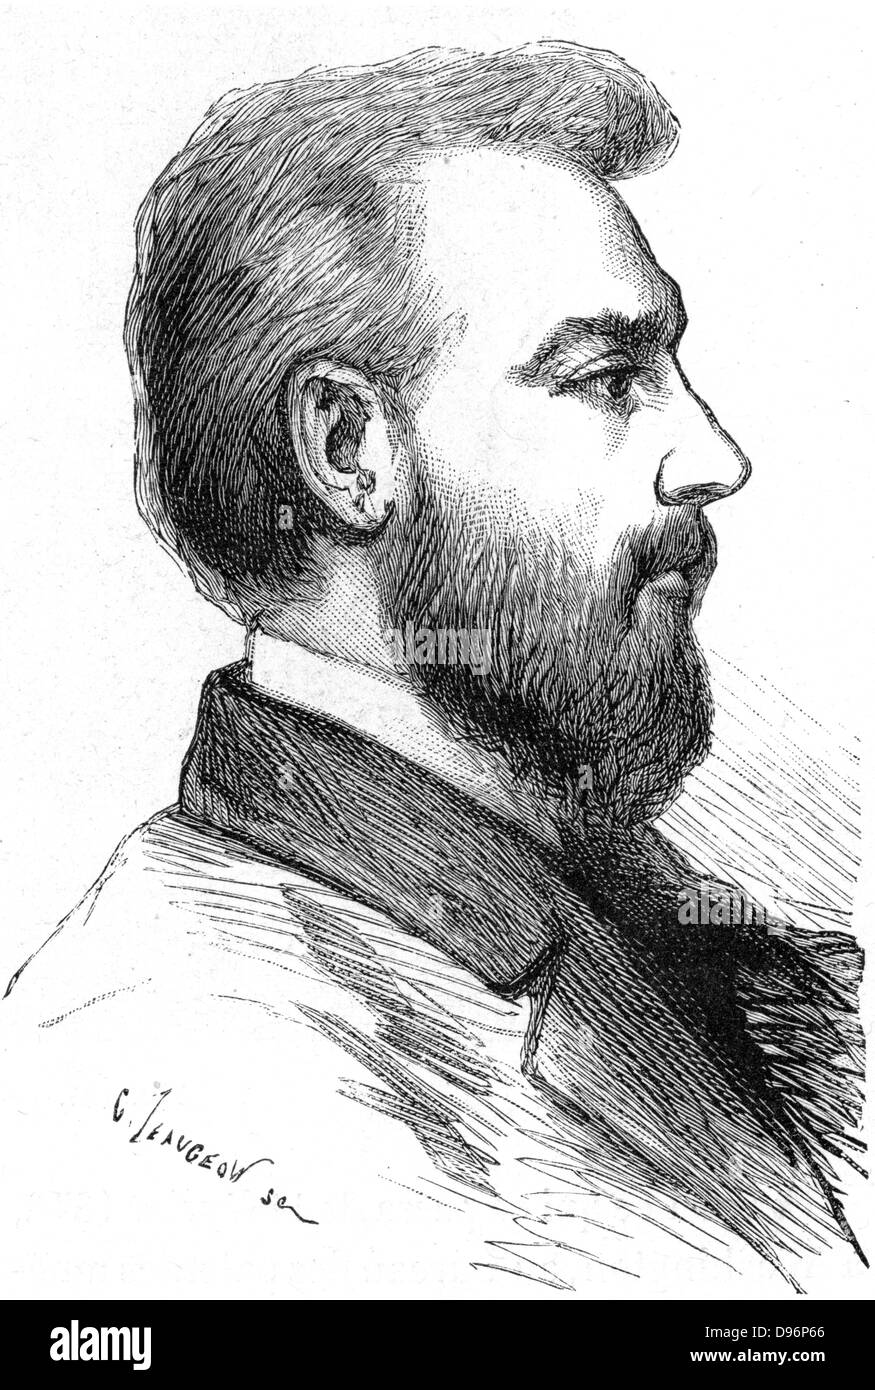 Alexander Graham Bell (1847-1922), Scottish born American inventor. Bell took out a patent for his telephone in 1876. From 'Les Nouvelles Conquetes de la Science', Louis Figuier, (Paris, 1883). Engraving. Stock Photo